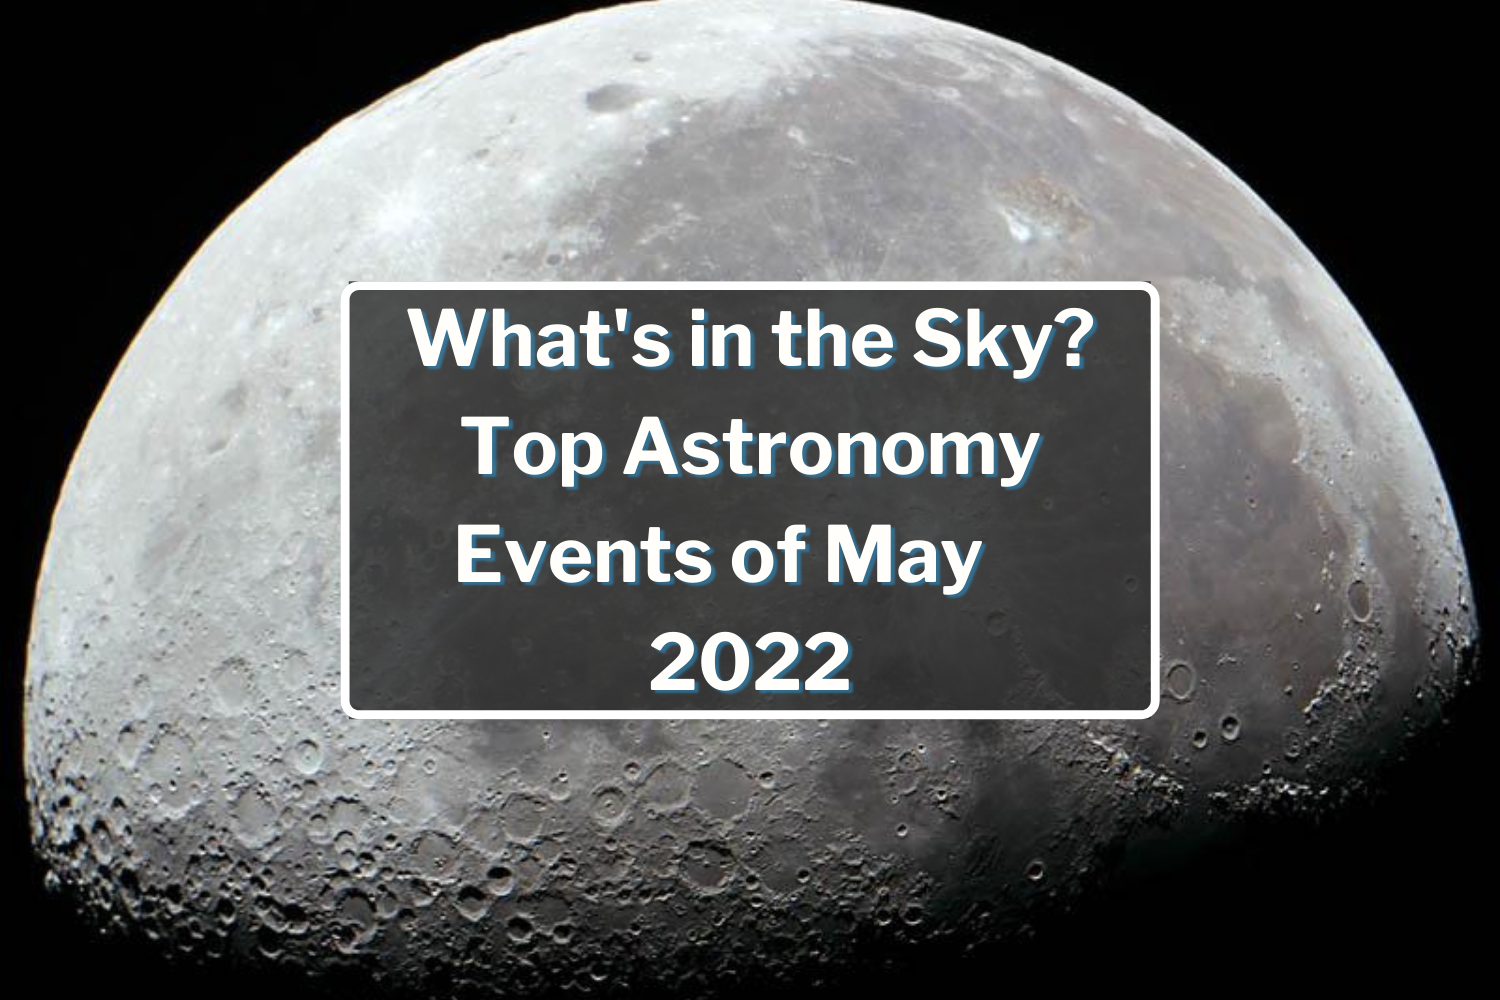 What's in the Sky: Top Astronomy Events of May 2022